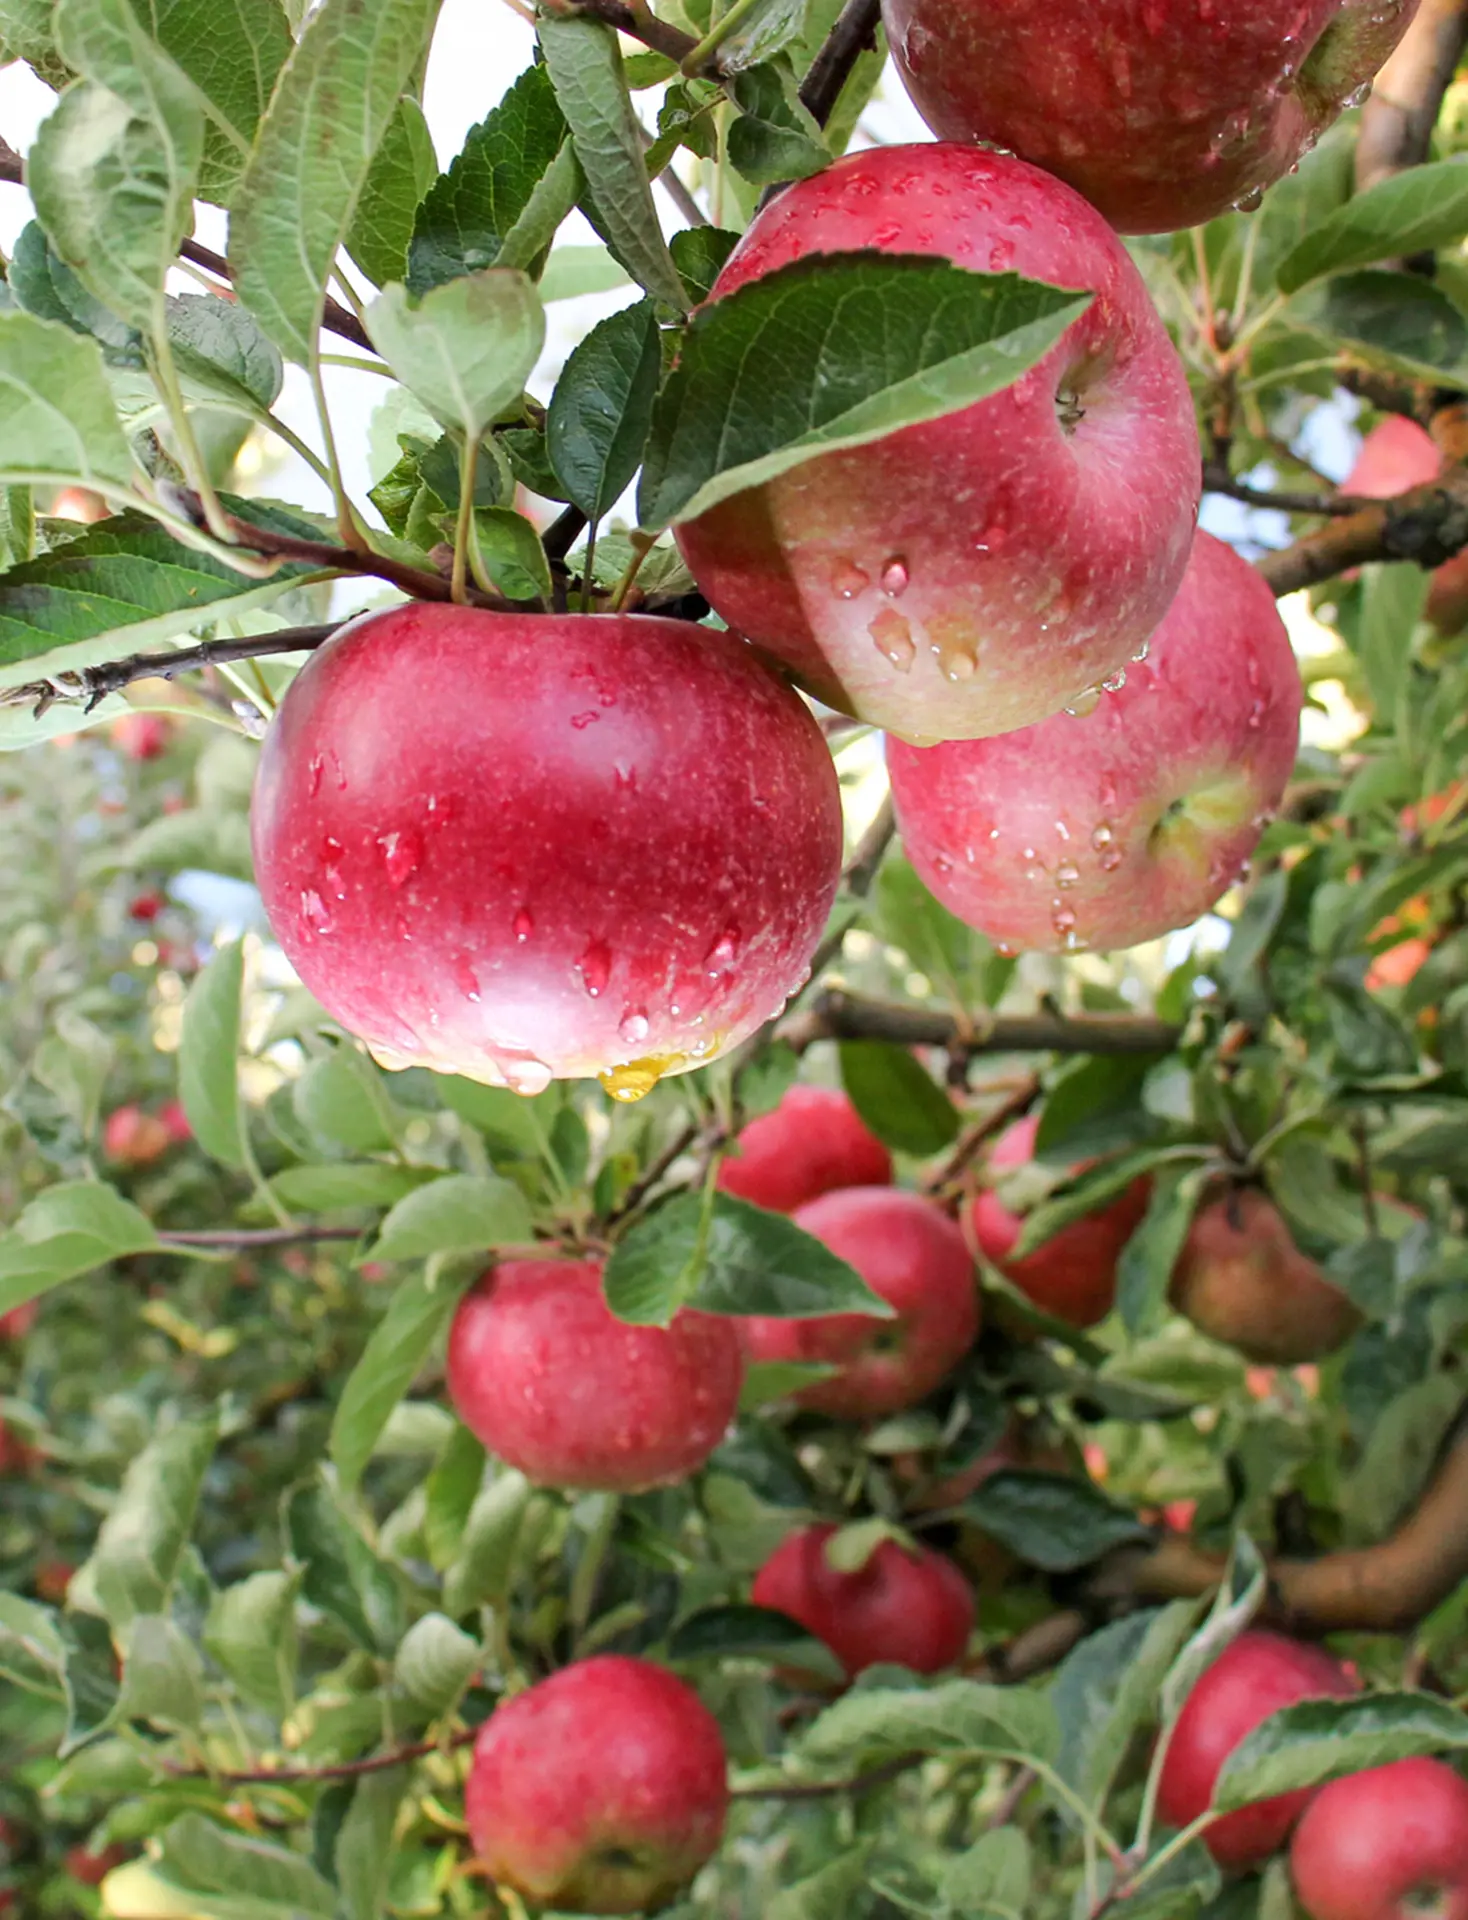 Apples Help Fight Asthma